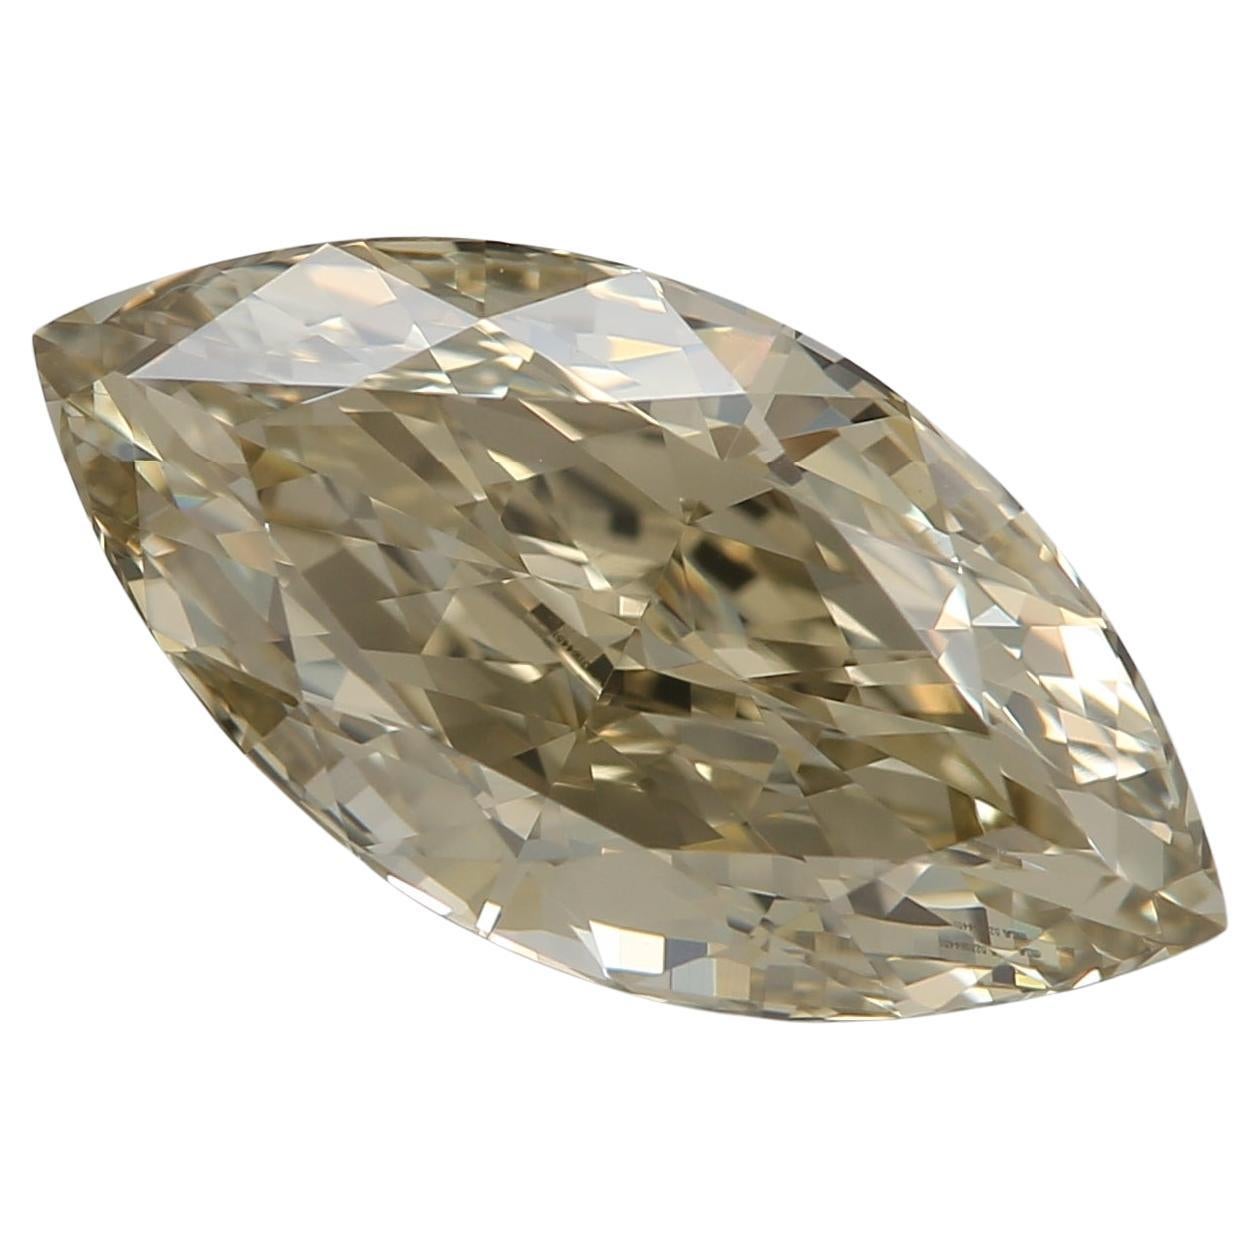 2.71-CARAT FANCY BROWNISH GREENISH YELLOW - Marquise VVS2-CLARITY GIA SKU- 7652 For Sale